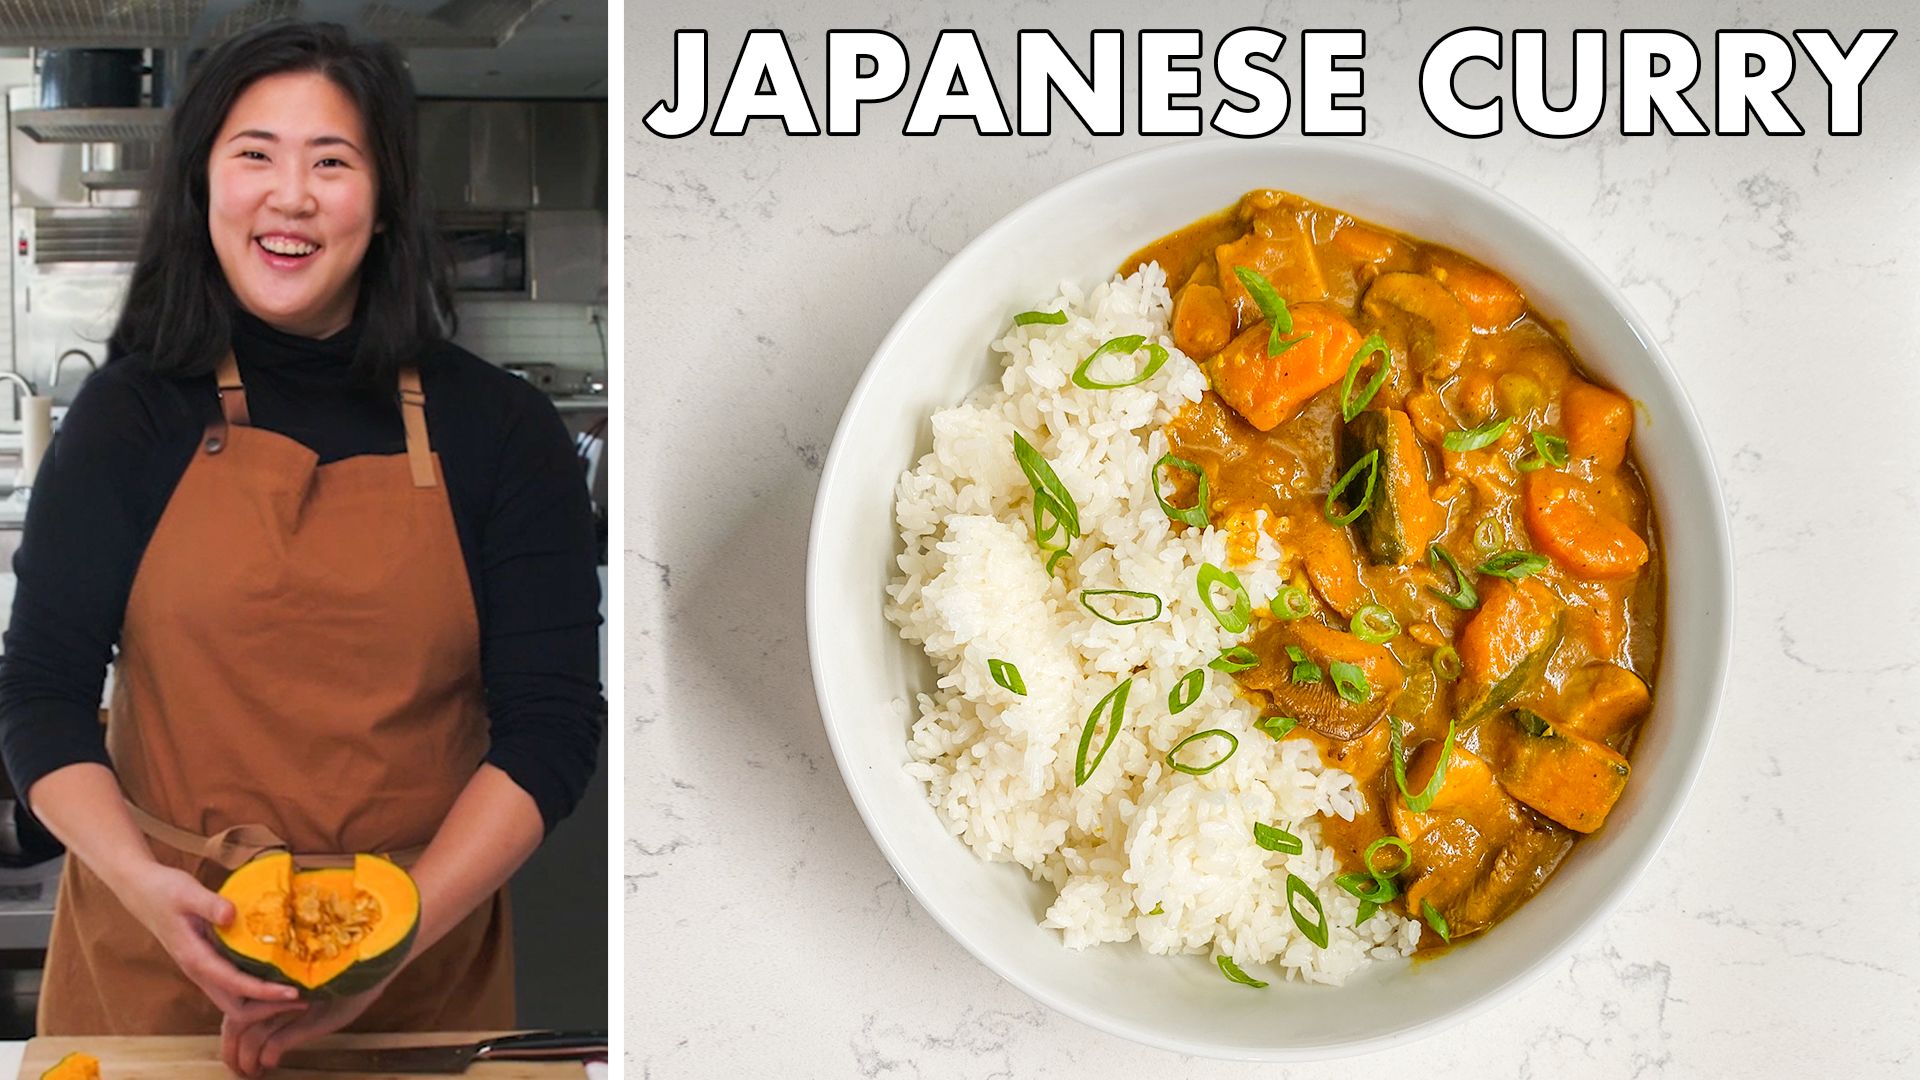 JAPANESE CURRY RECIPE  How To Make Curry using Golden Curry